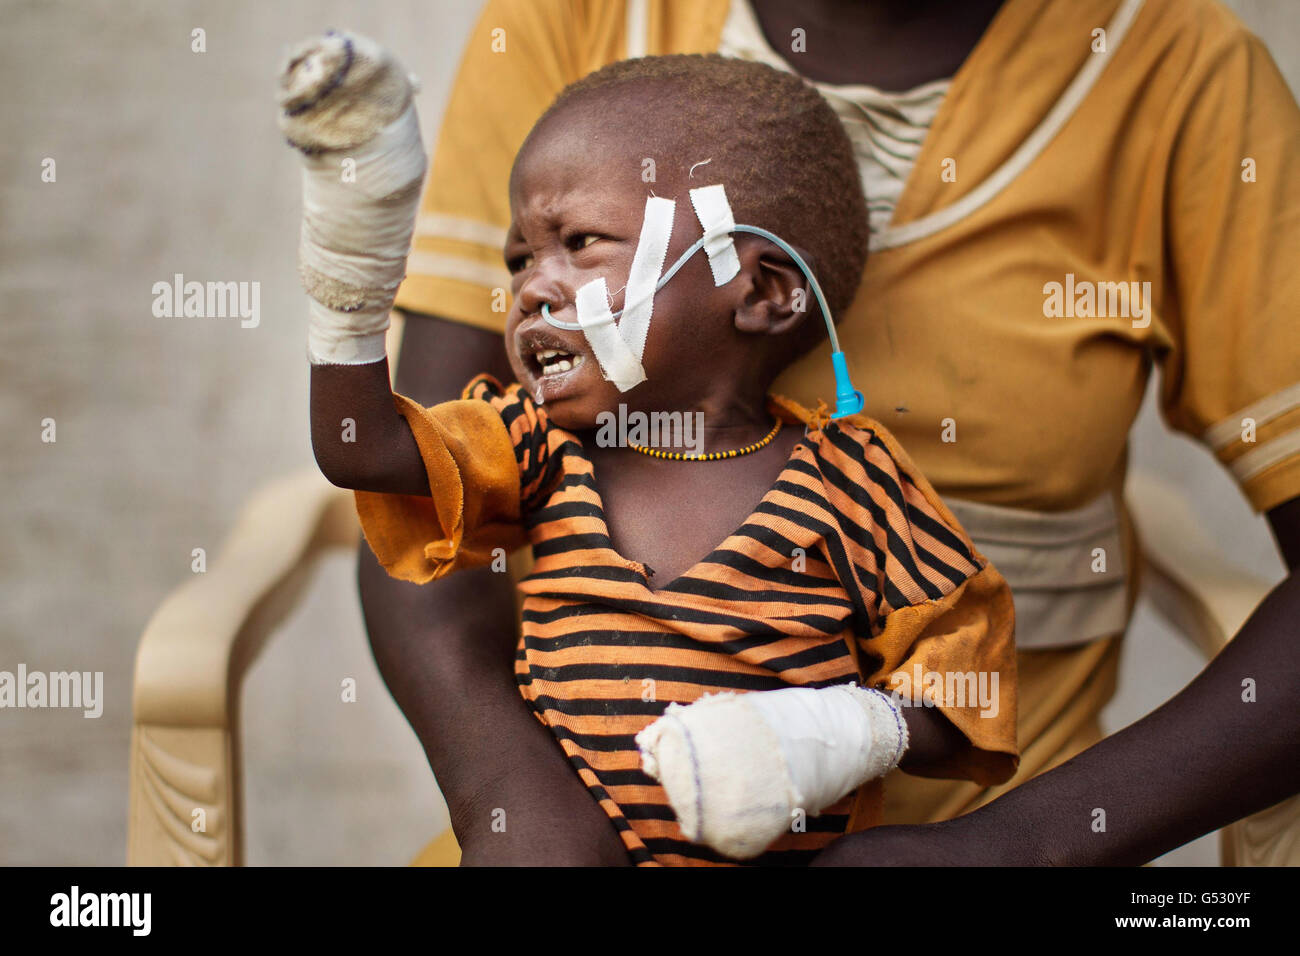 A baby injured by the bombing of his village cries in the clinic in Doro refugee camp in Bunj,Maban in the Upper Nile Blue Nile state of northeastern South Sudan, Africa. The region recently suffered from serious clashes between North and South Sudan resulting in tens thousands of people forced into refugee camps like Doro and Jamman and hundreds of deaths from the bombing of villages and clashes between rival armed groups. Stock Photo